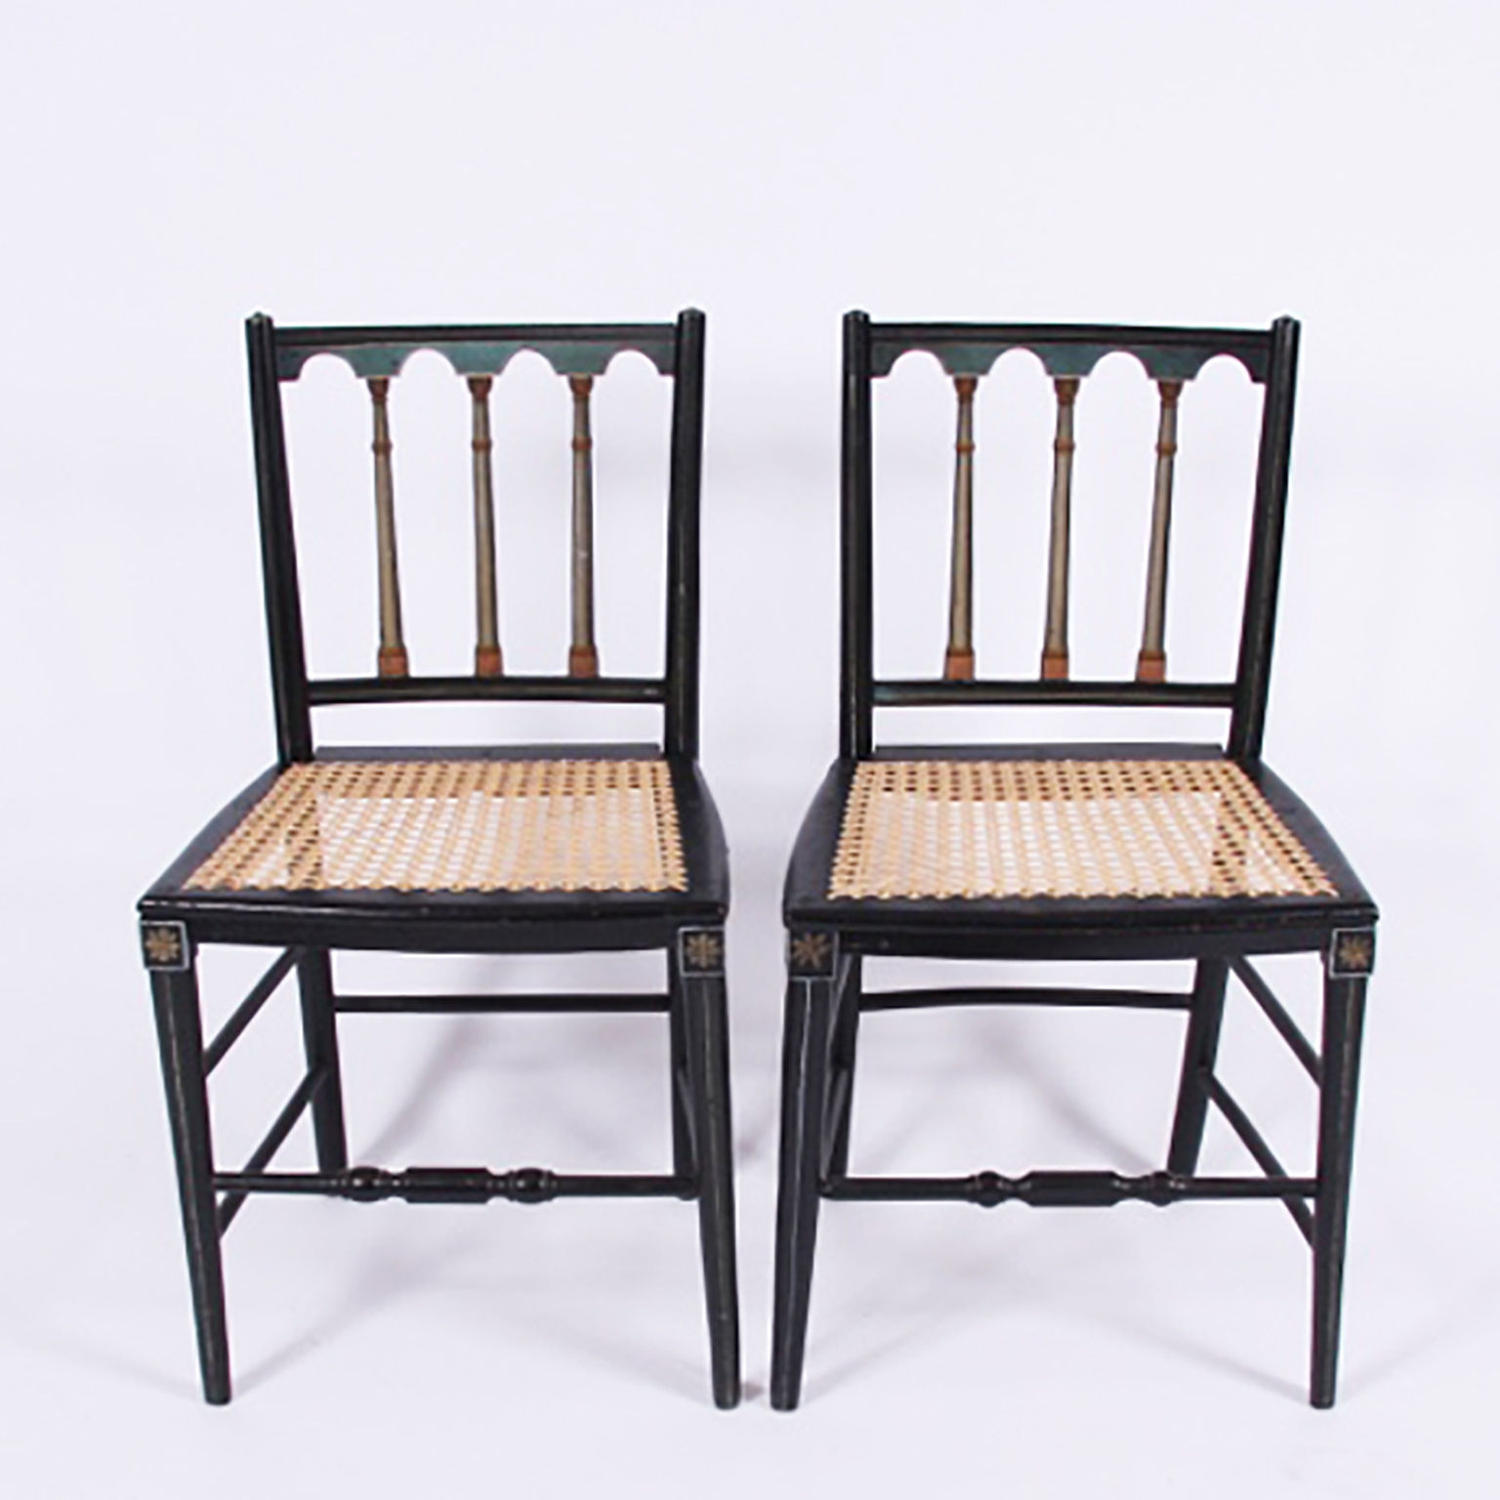 Pair of Swedish Caned Chairs